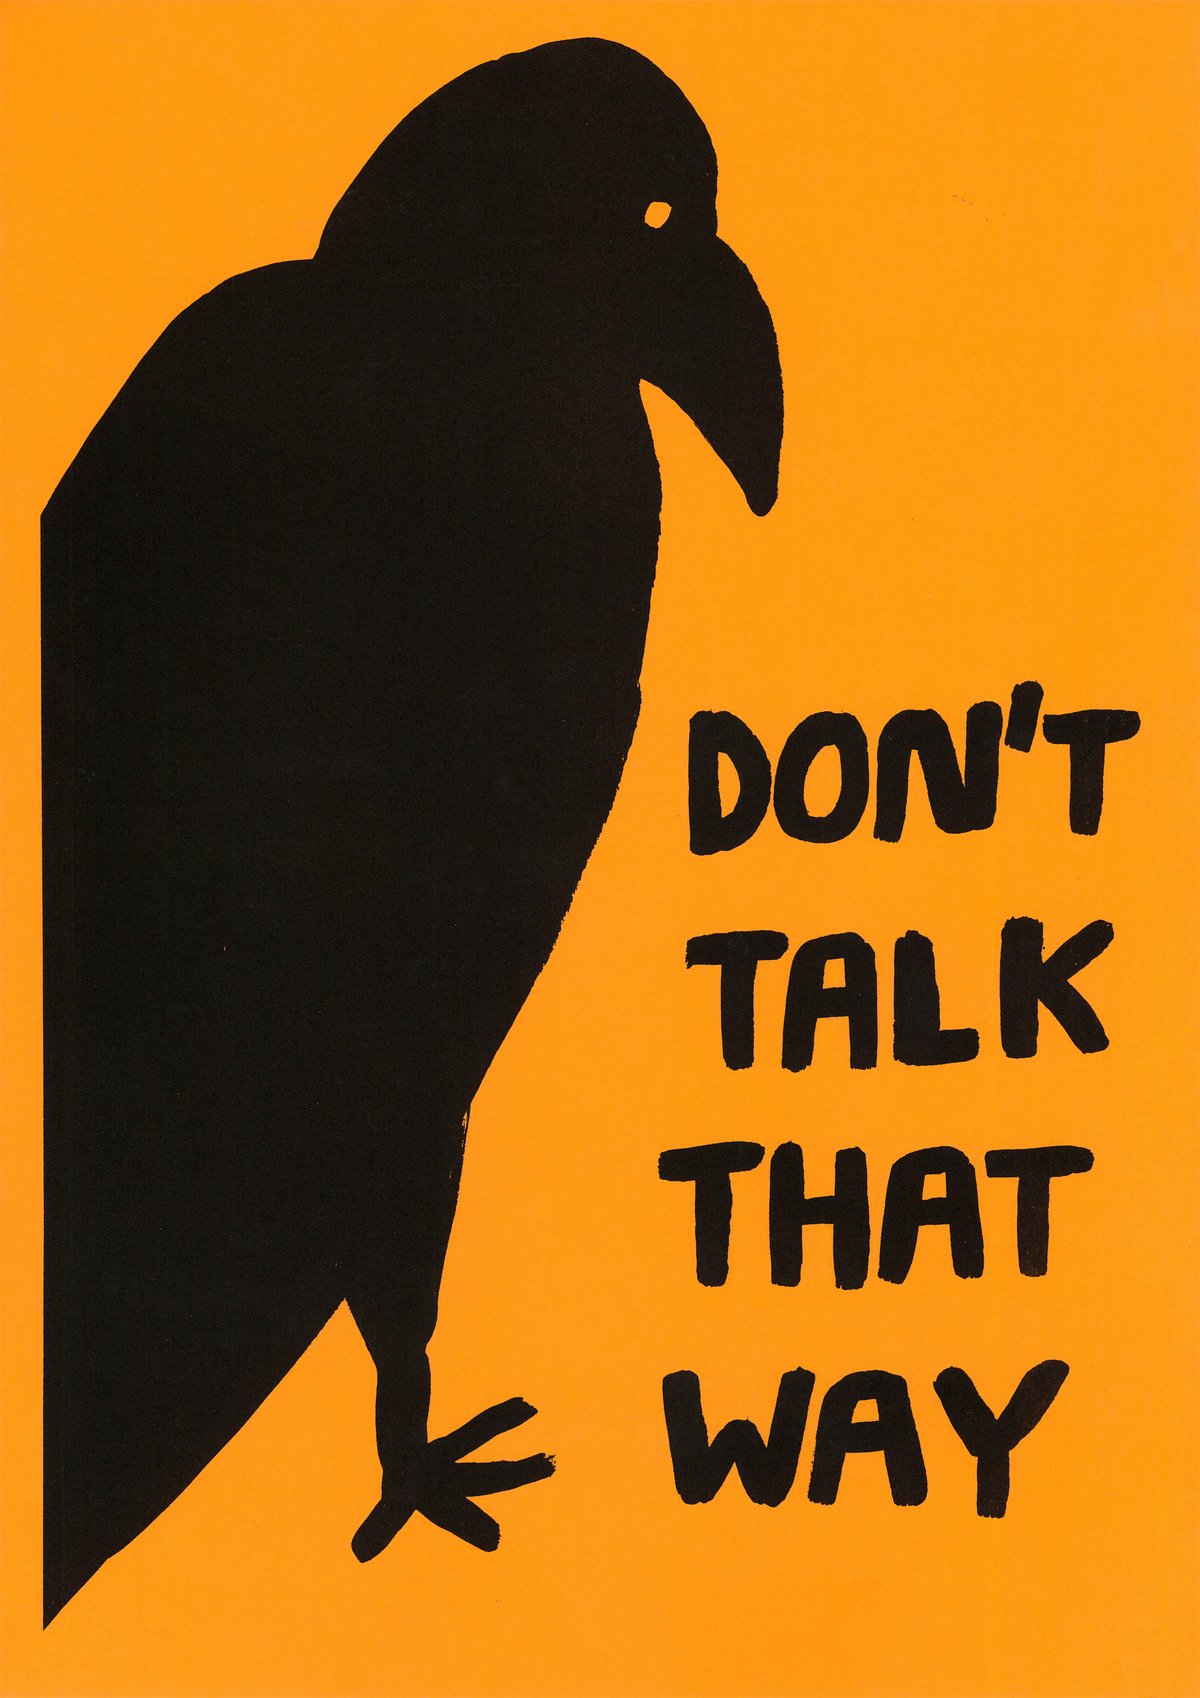 Image of Don't talk that way